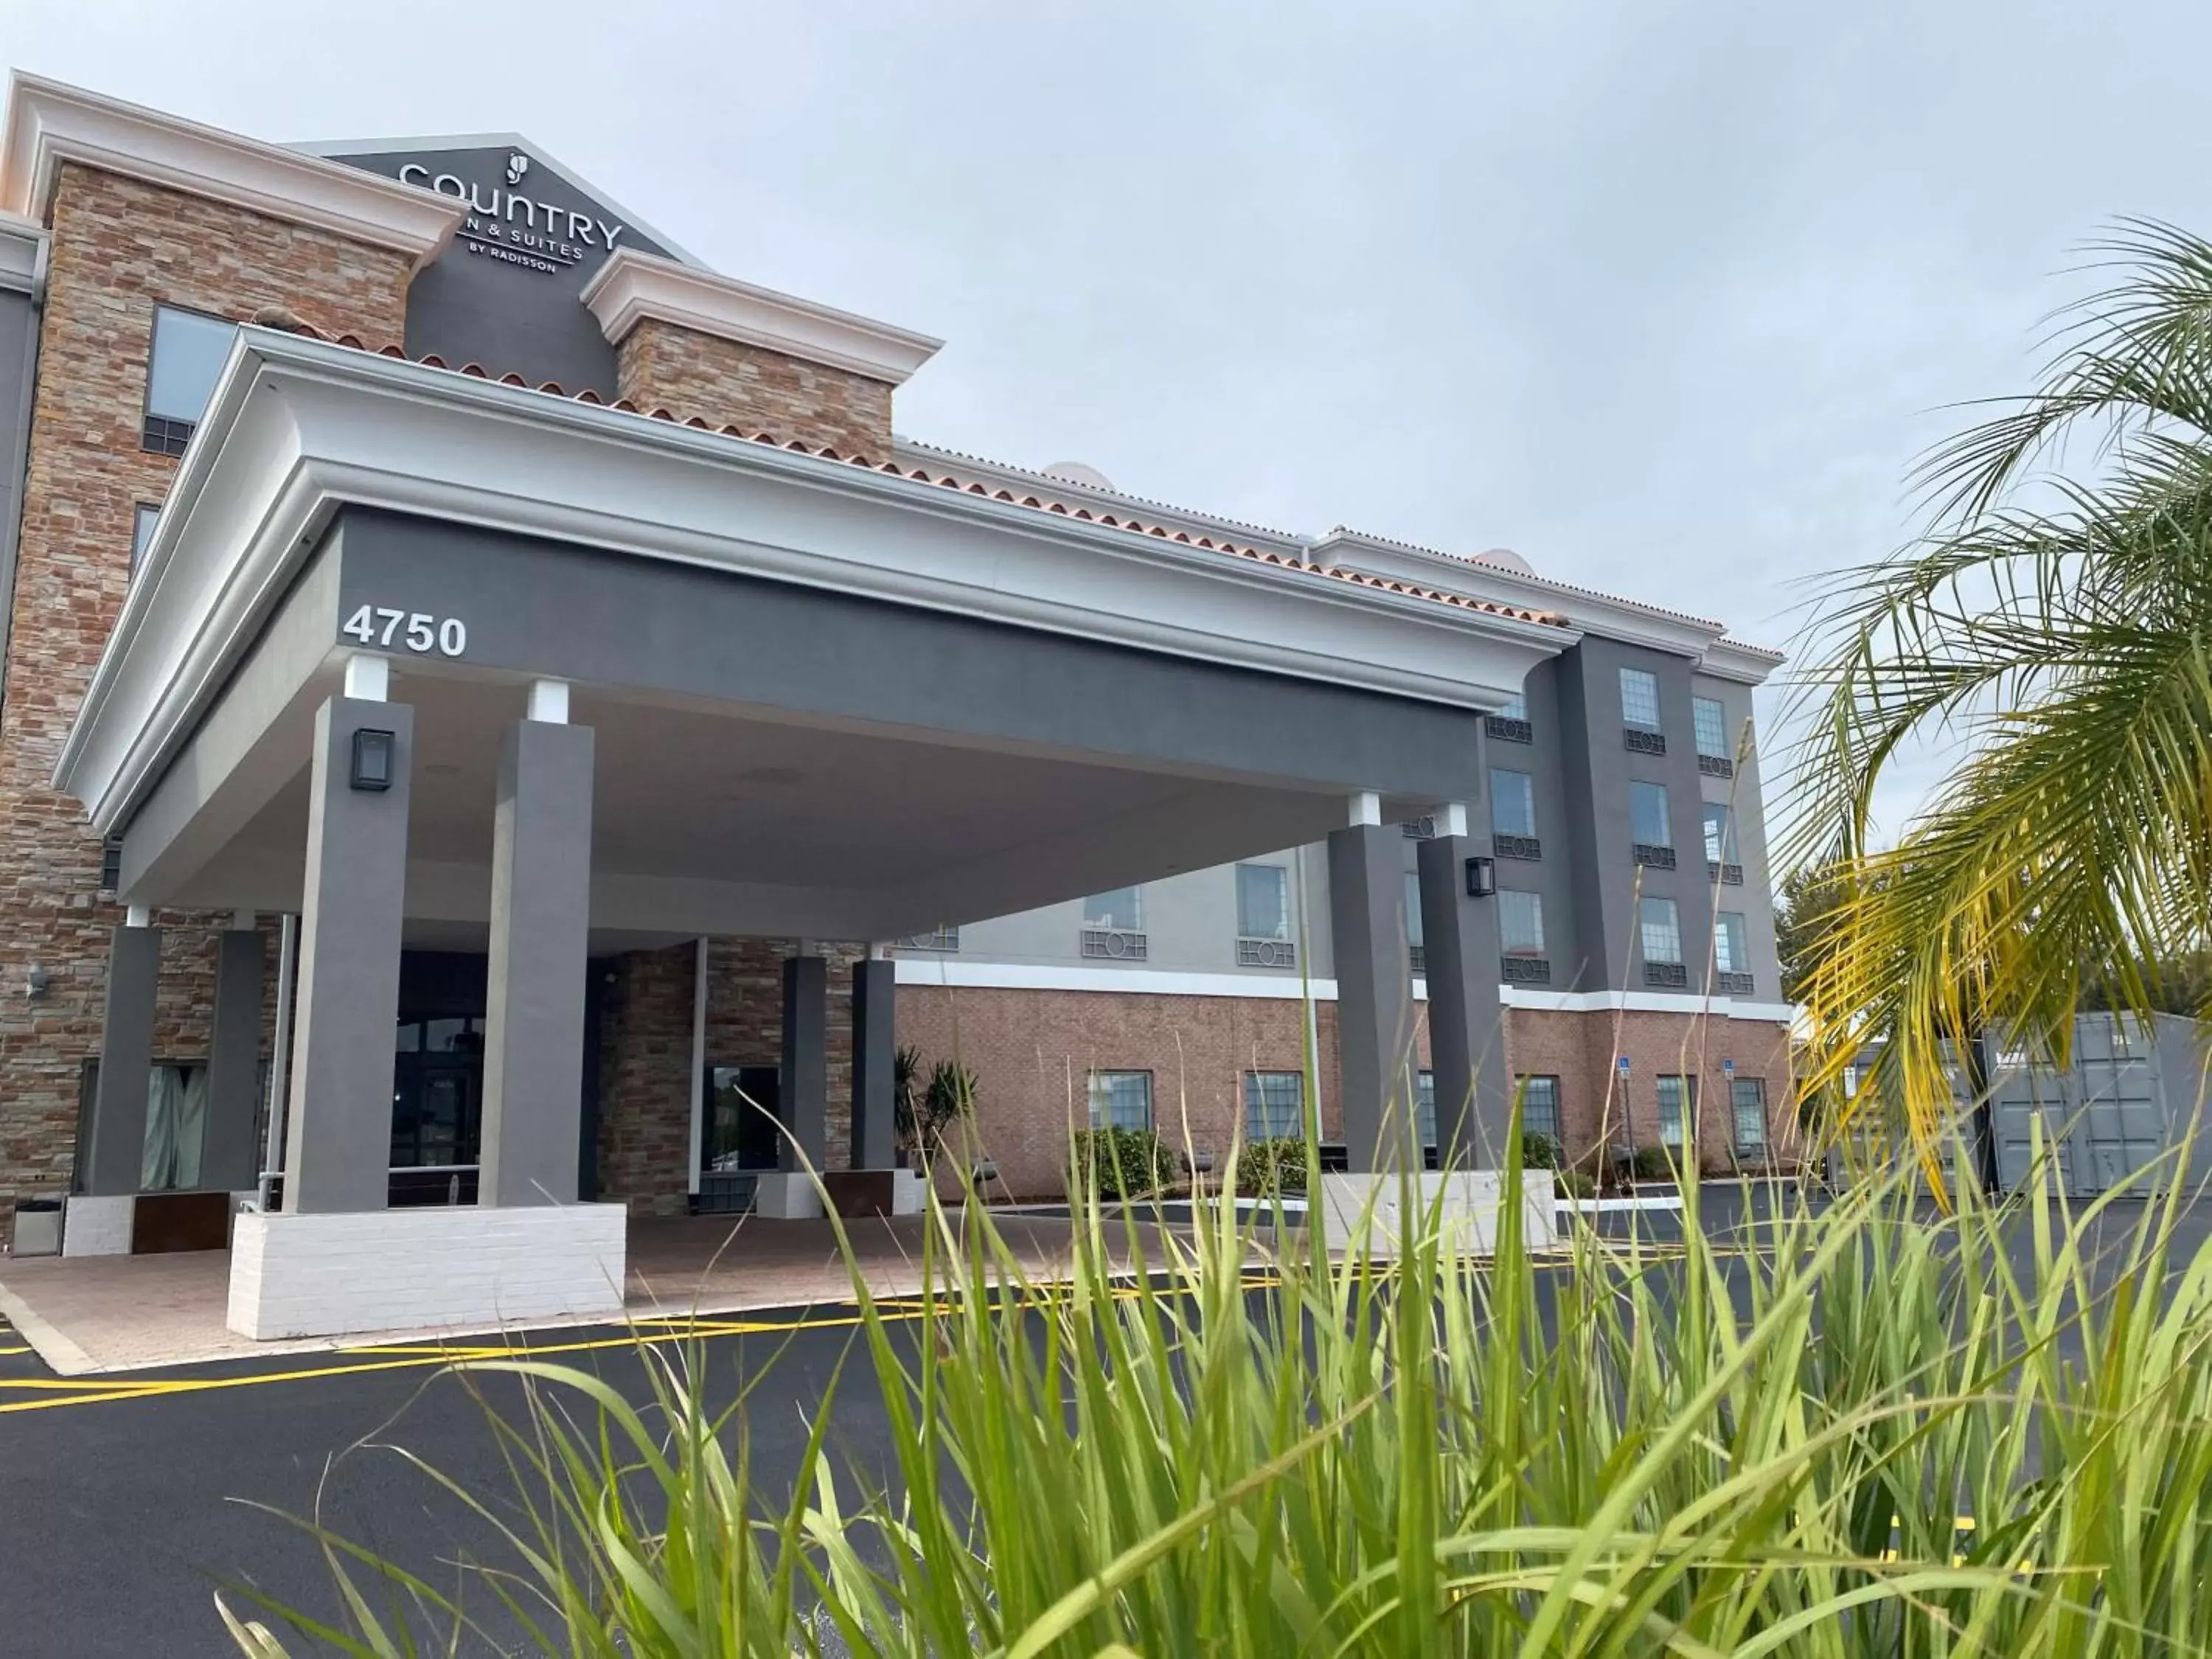 Property building in Country Inn & Suites by Radisson, Tampa RJ Stadium